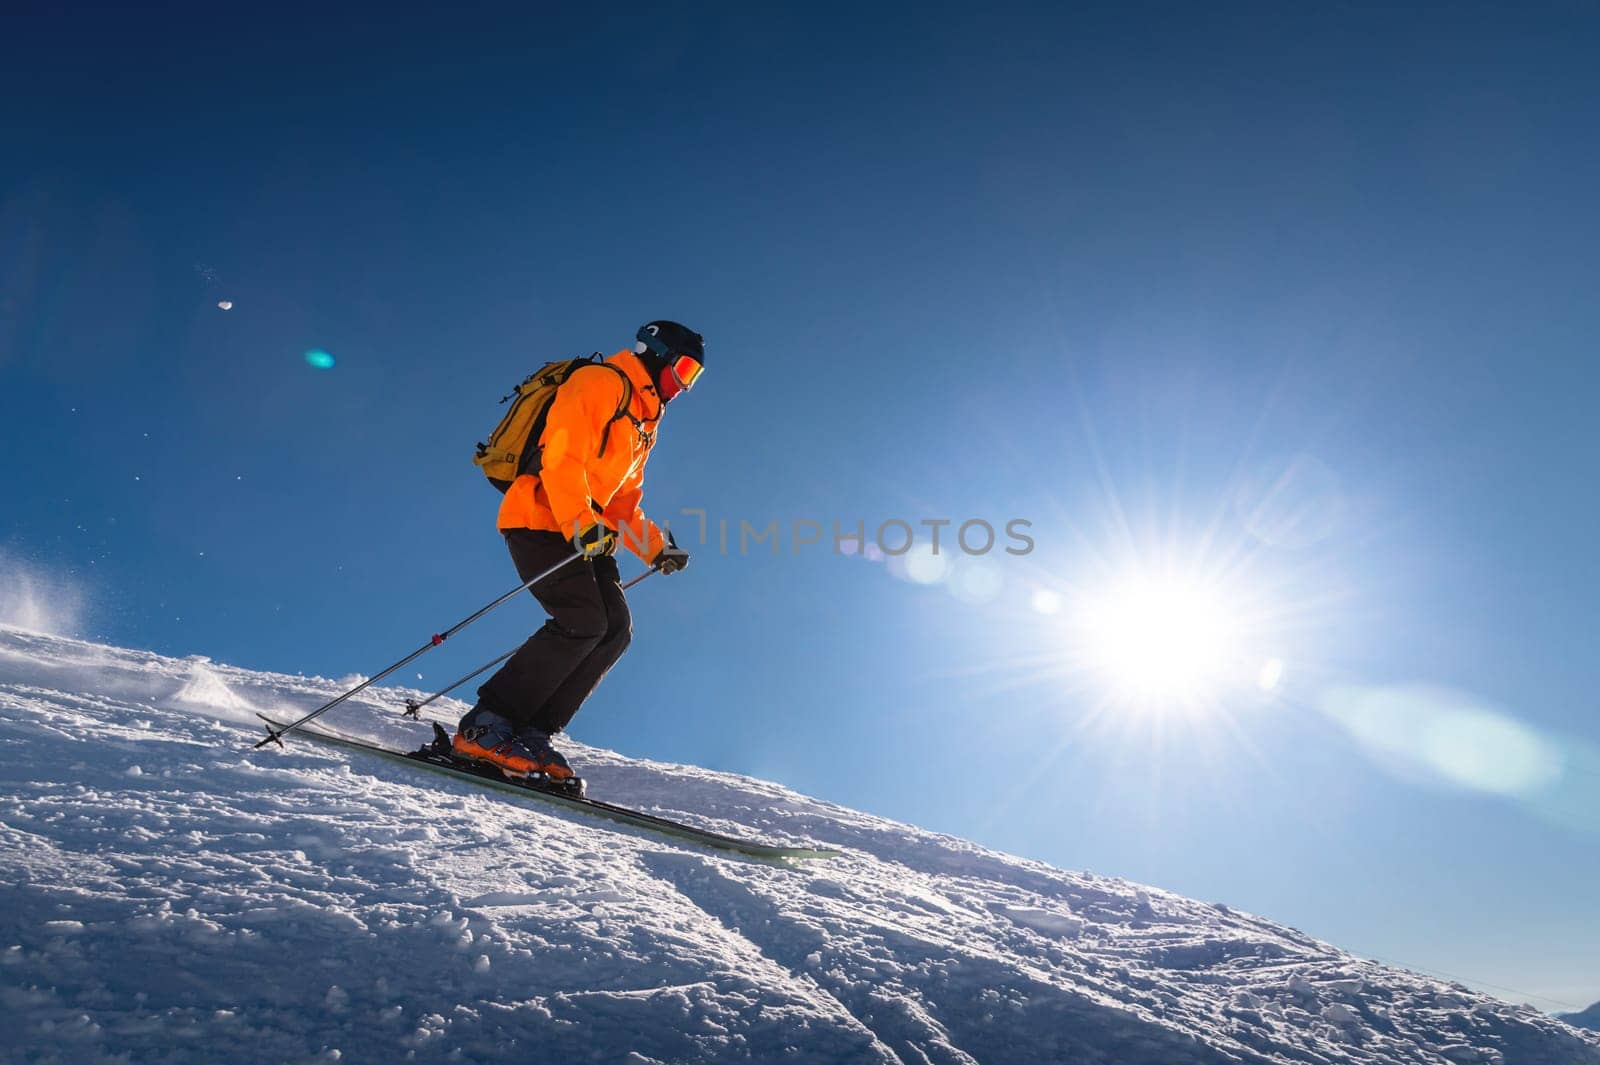 Professional skier athlete skiing at the top of a ski resort. Winter holidays and sports concept with adventure guy on the top of the mountain skiing down the slope.Warm bright sunny day.